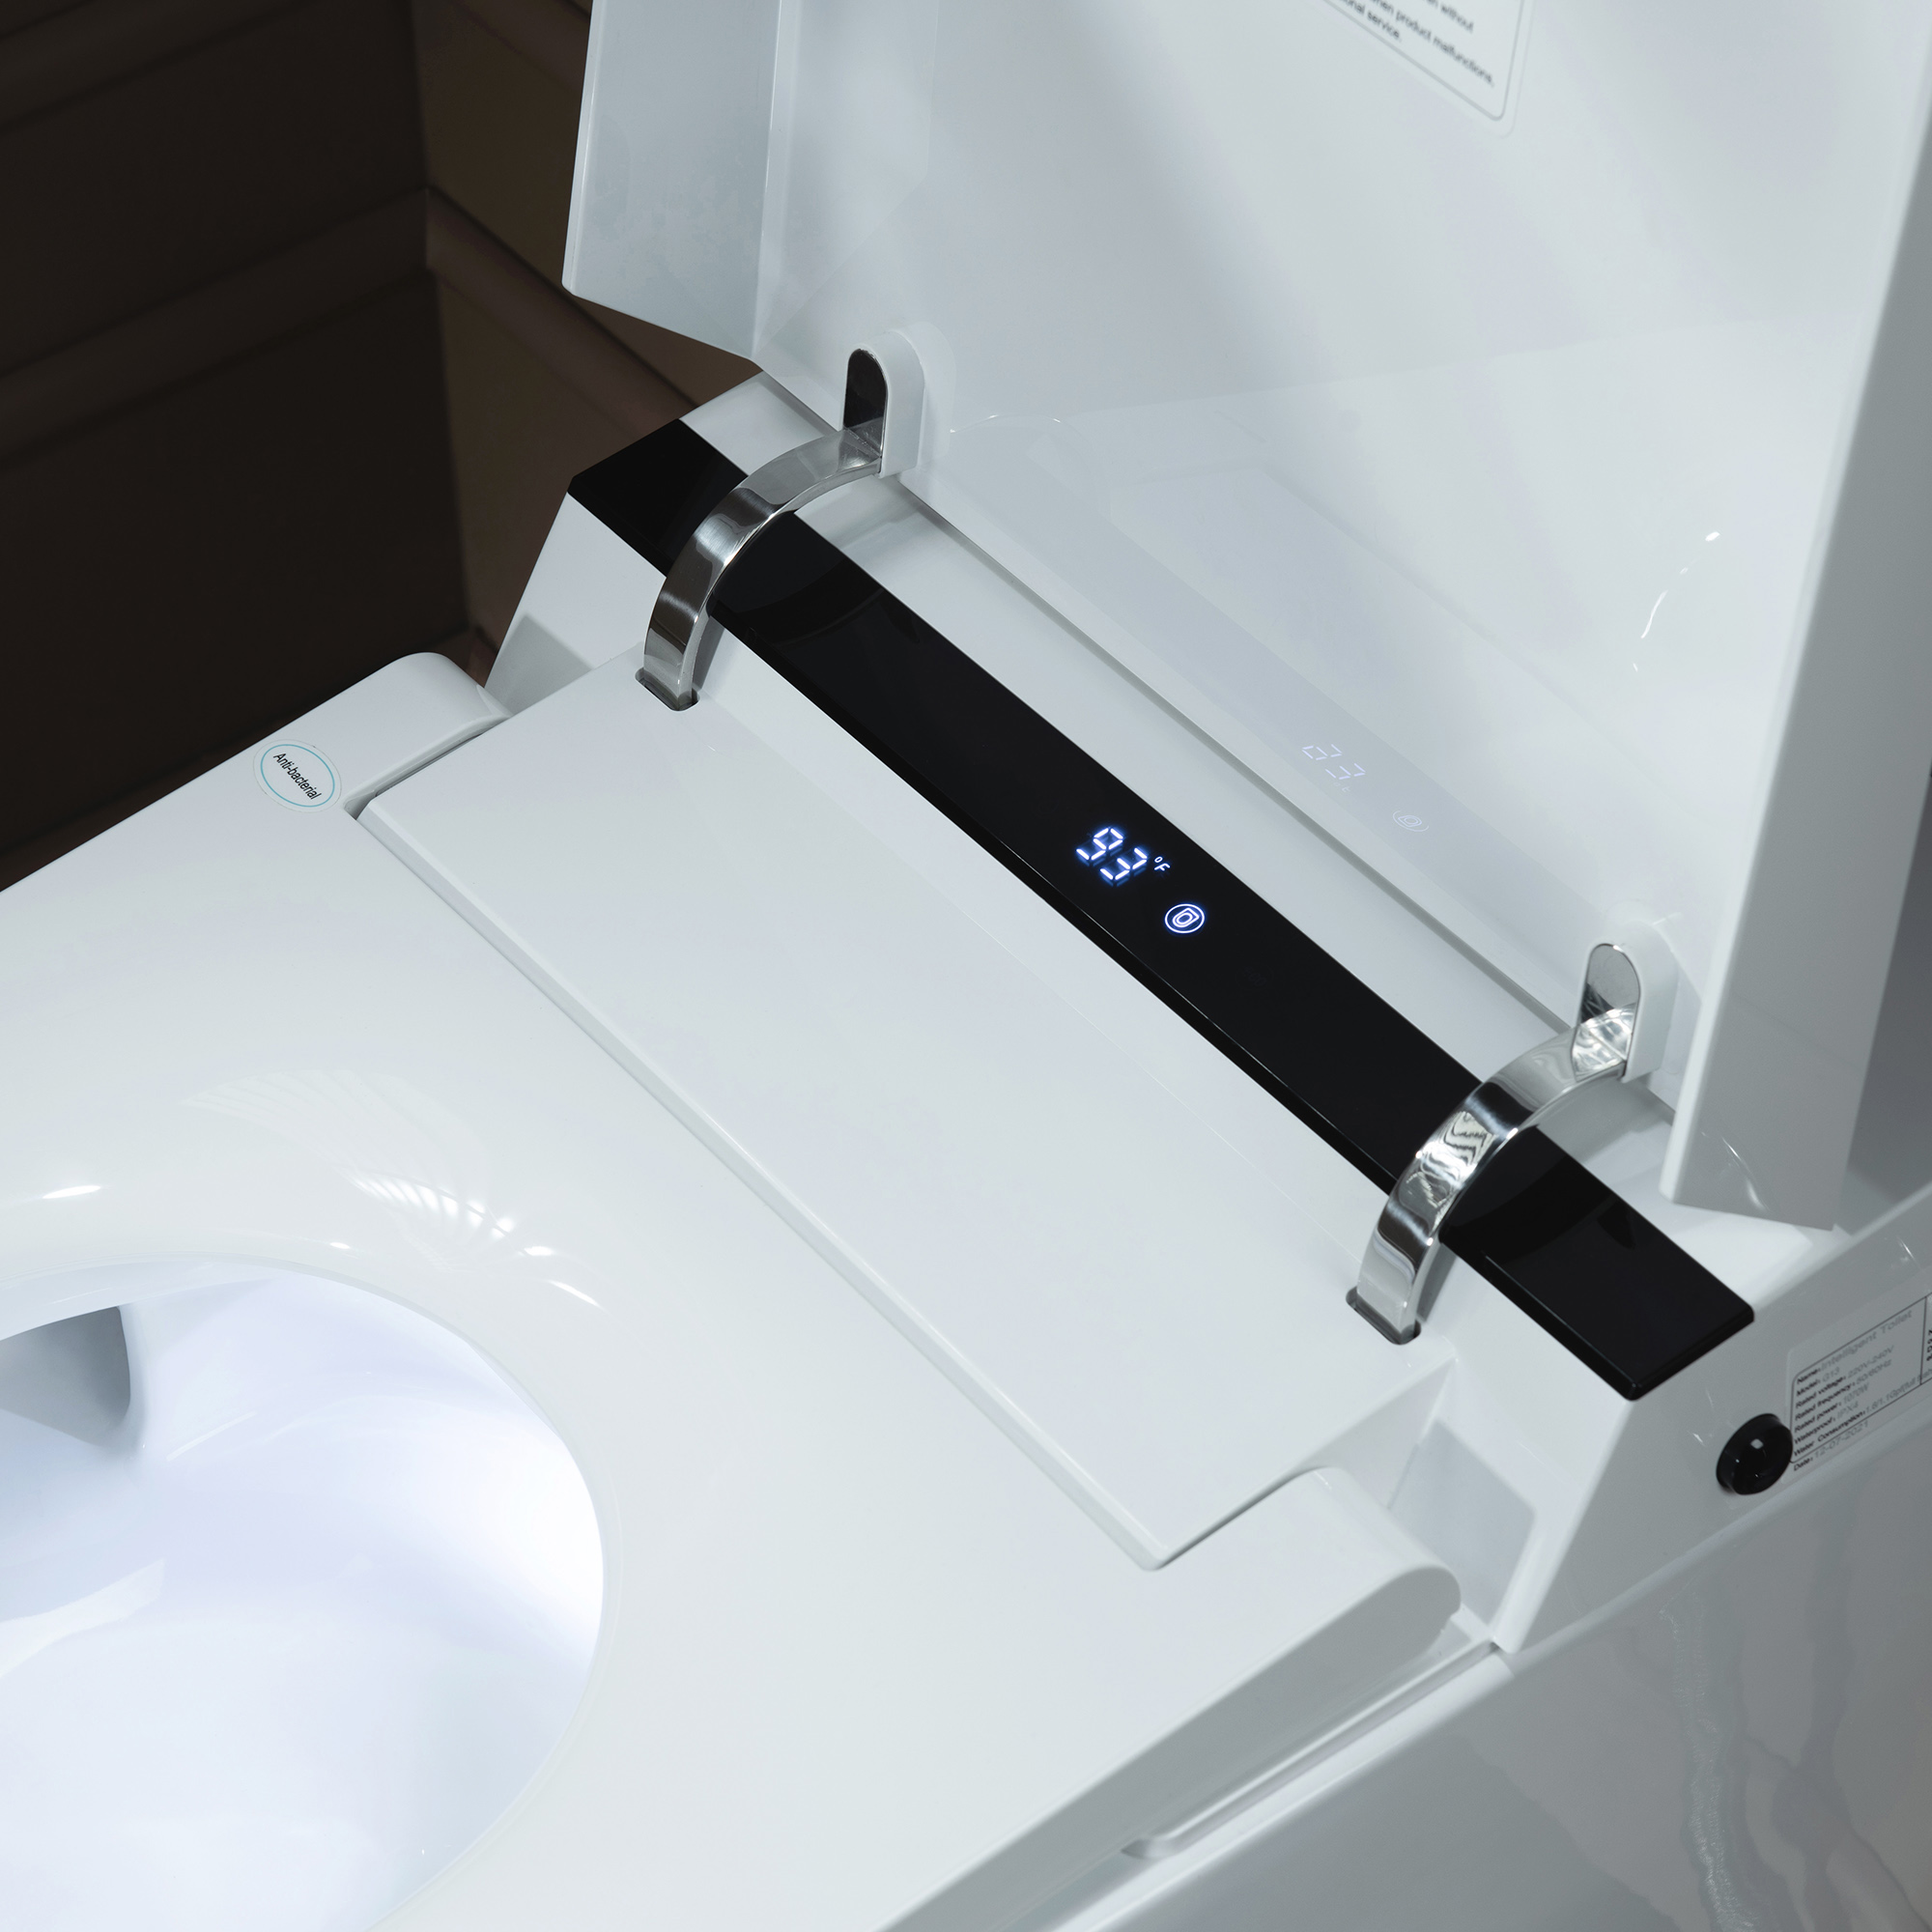  WOODBRIDGE B0990S One Piece Elongated Smart Toilet Bidet with Massage Washing, Auto Open and Close Seat and Lid, Auto Flush, Heated Seat and Integrated Multi Function Remote Control, White_2120